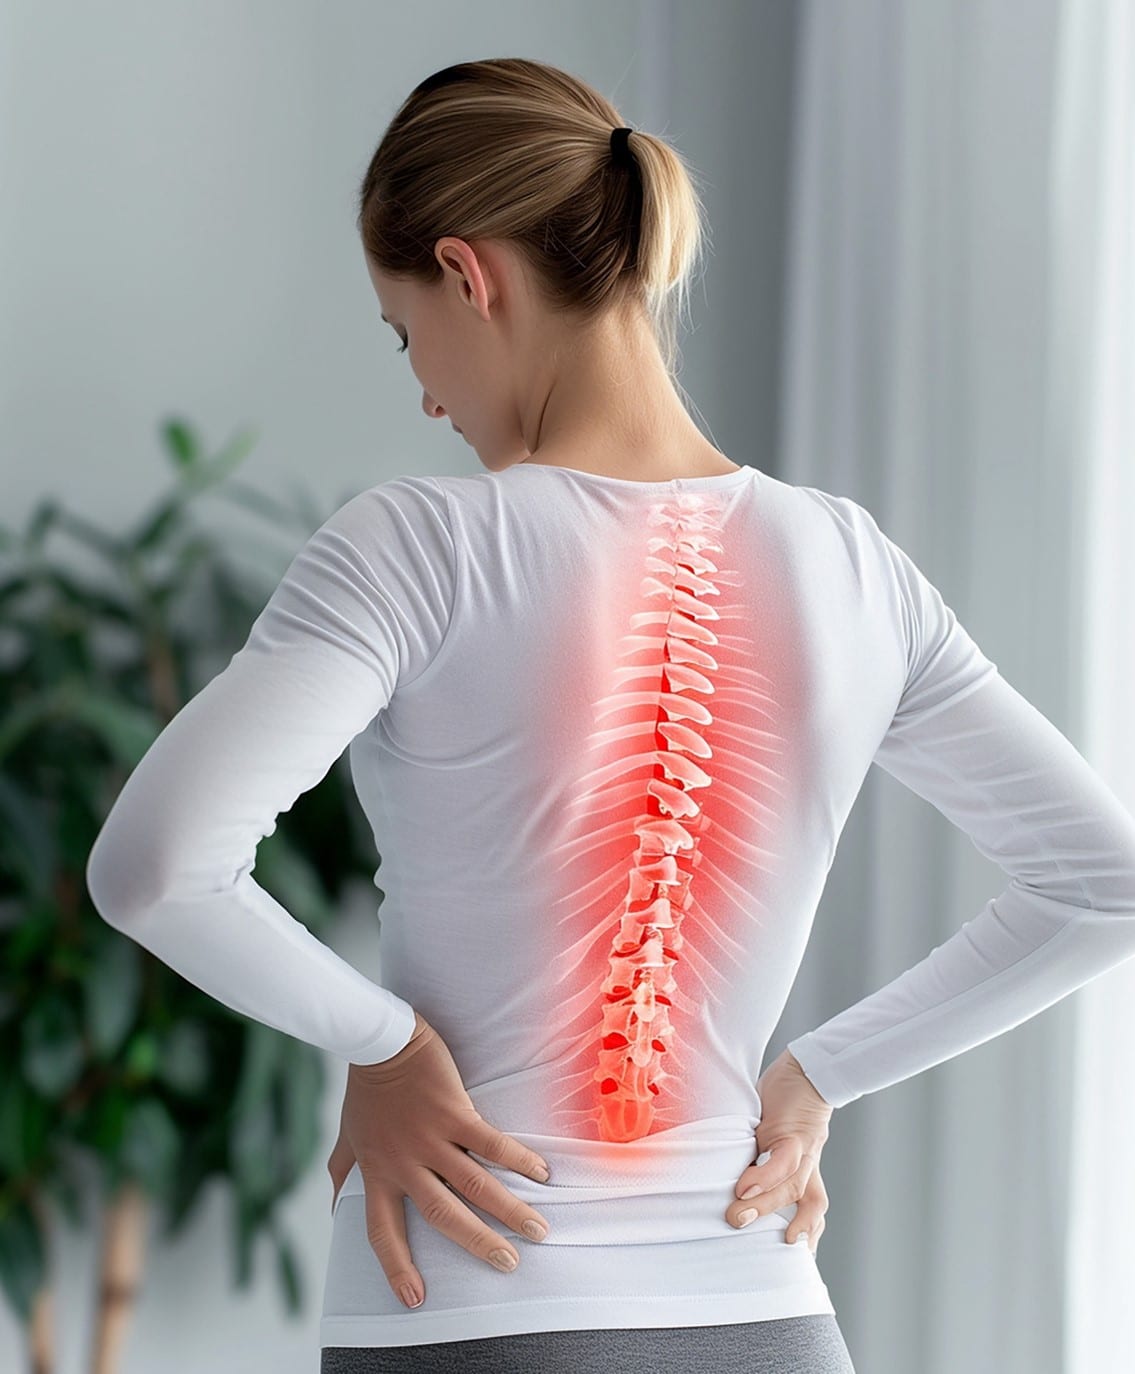 Are-you-at-risk-of-spine-disorder.jpg